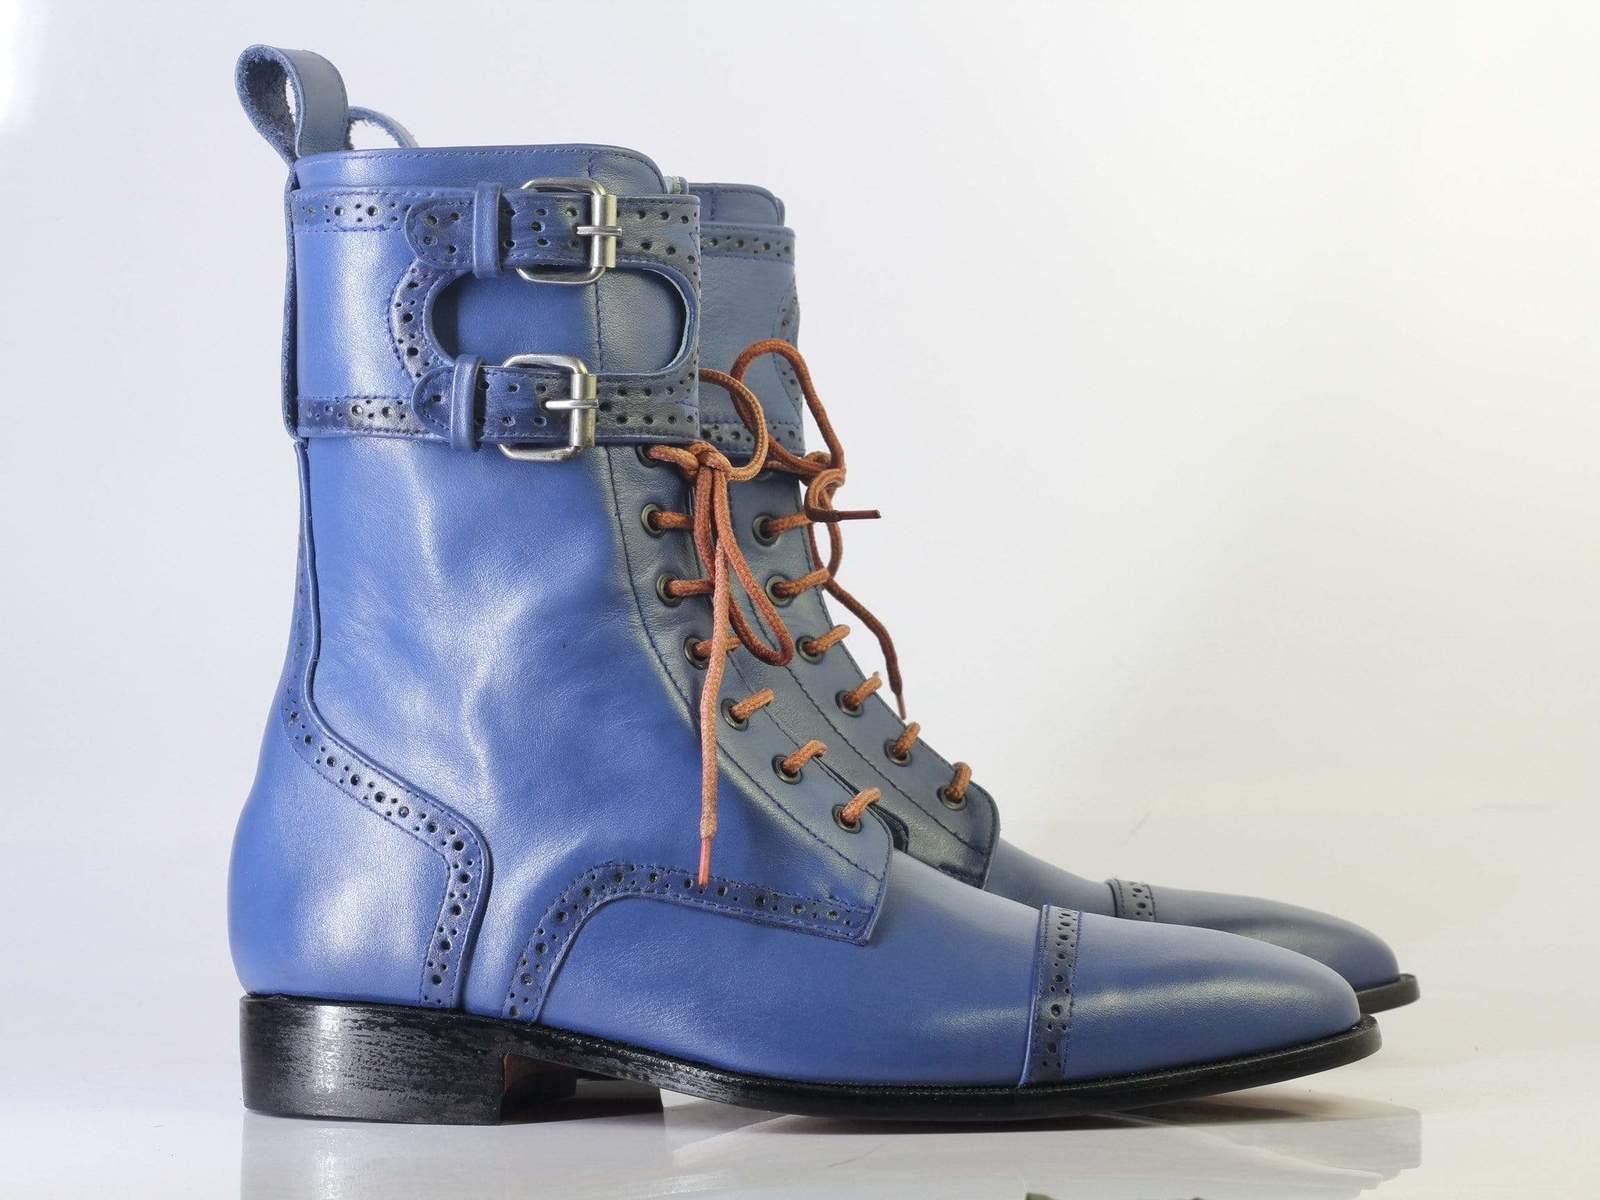 Bespoke Blue Cap Toe Leather Buckle Long Boots For Men's - Boots